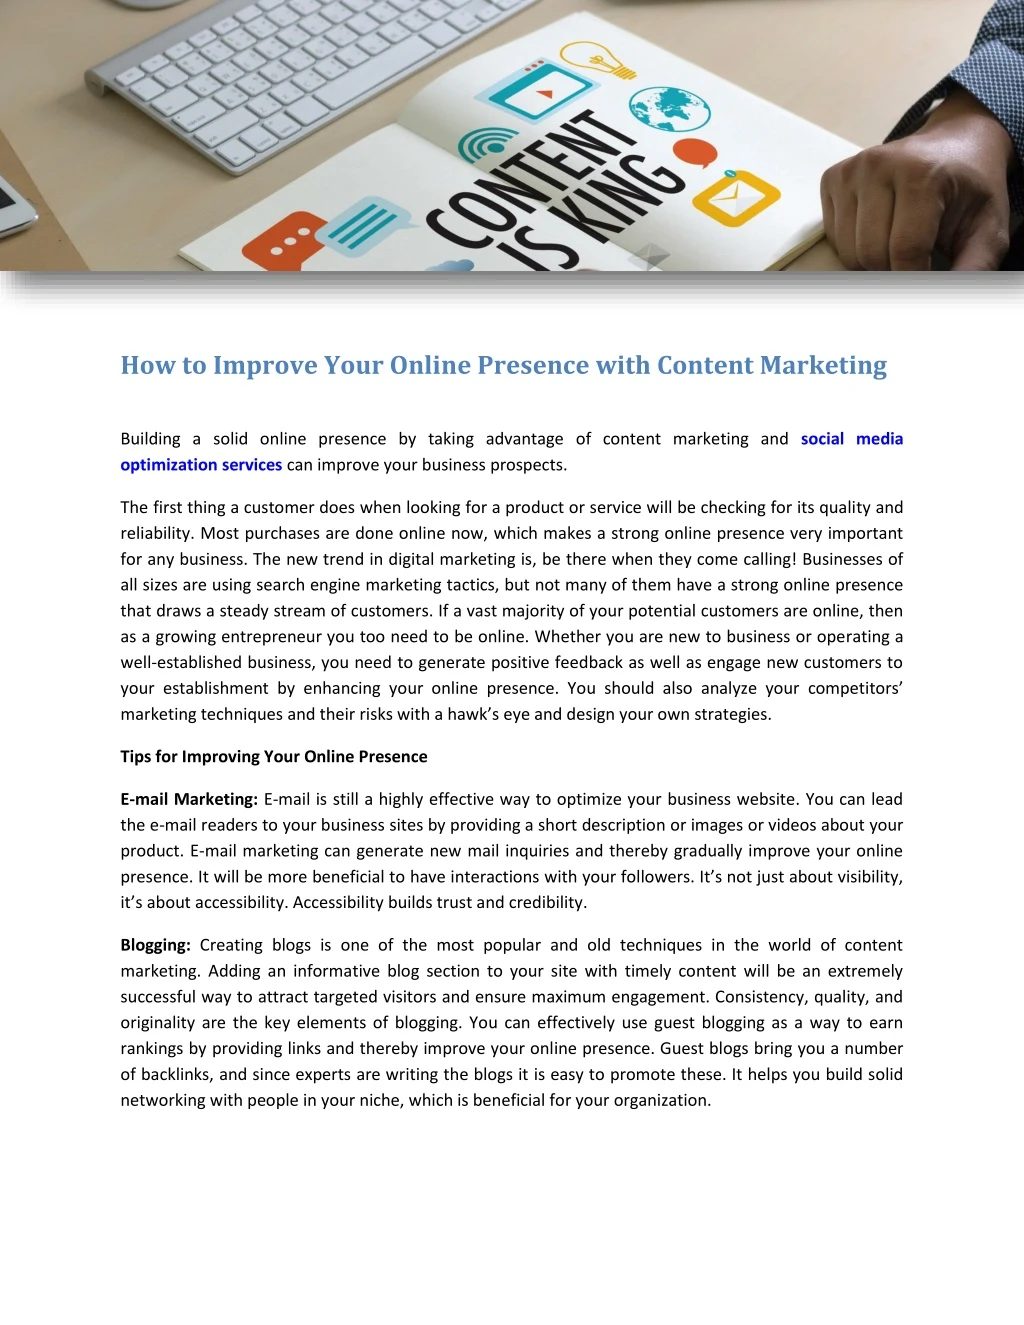 how to improve your online presence with content